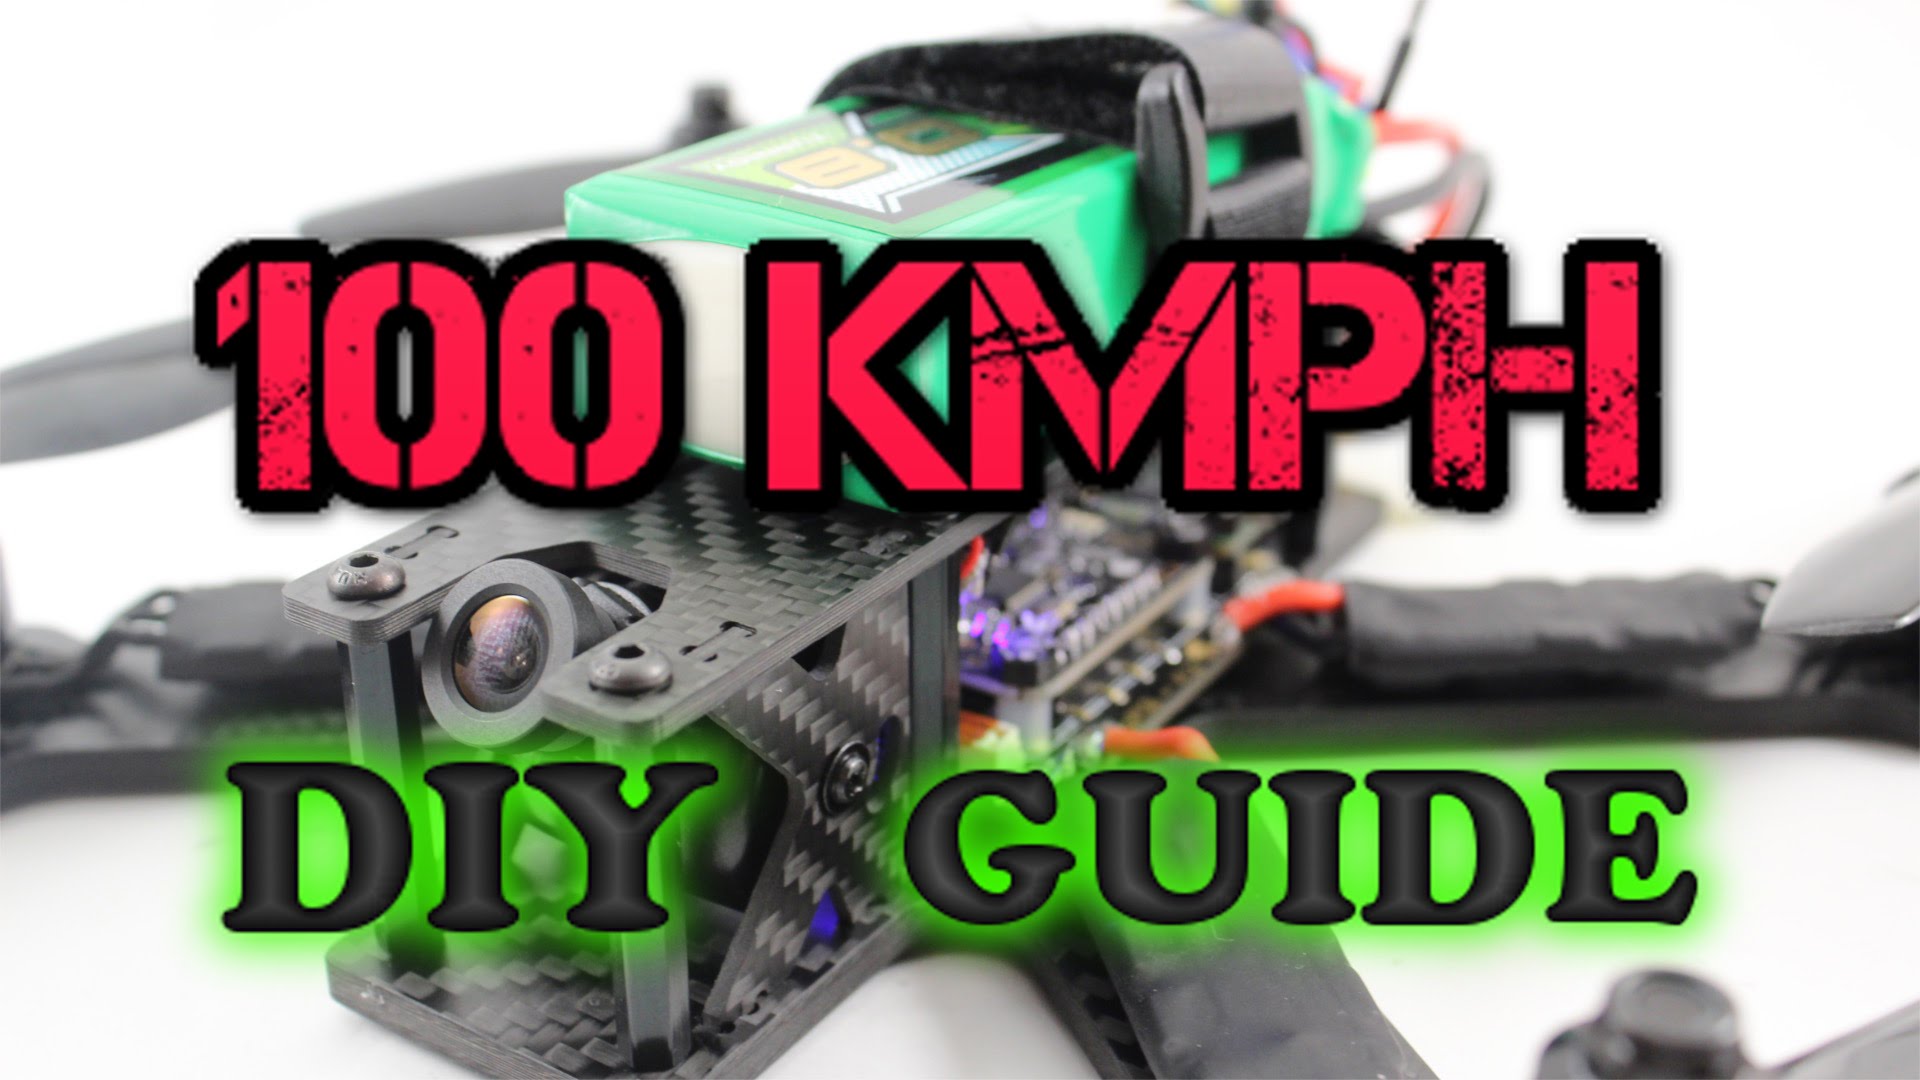 How to Build 100kmph FPV RACING DRONE – Full Video guide 5S DIY